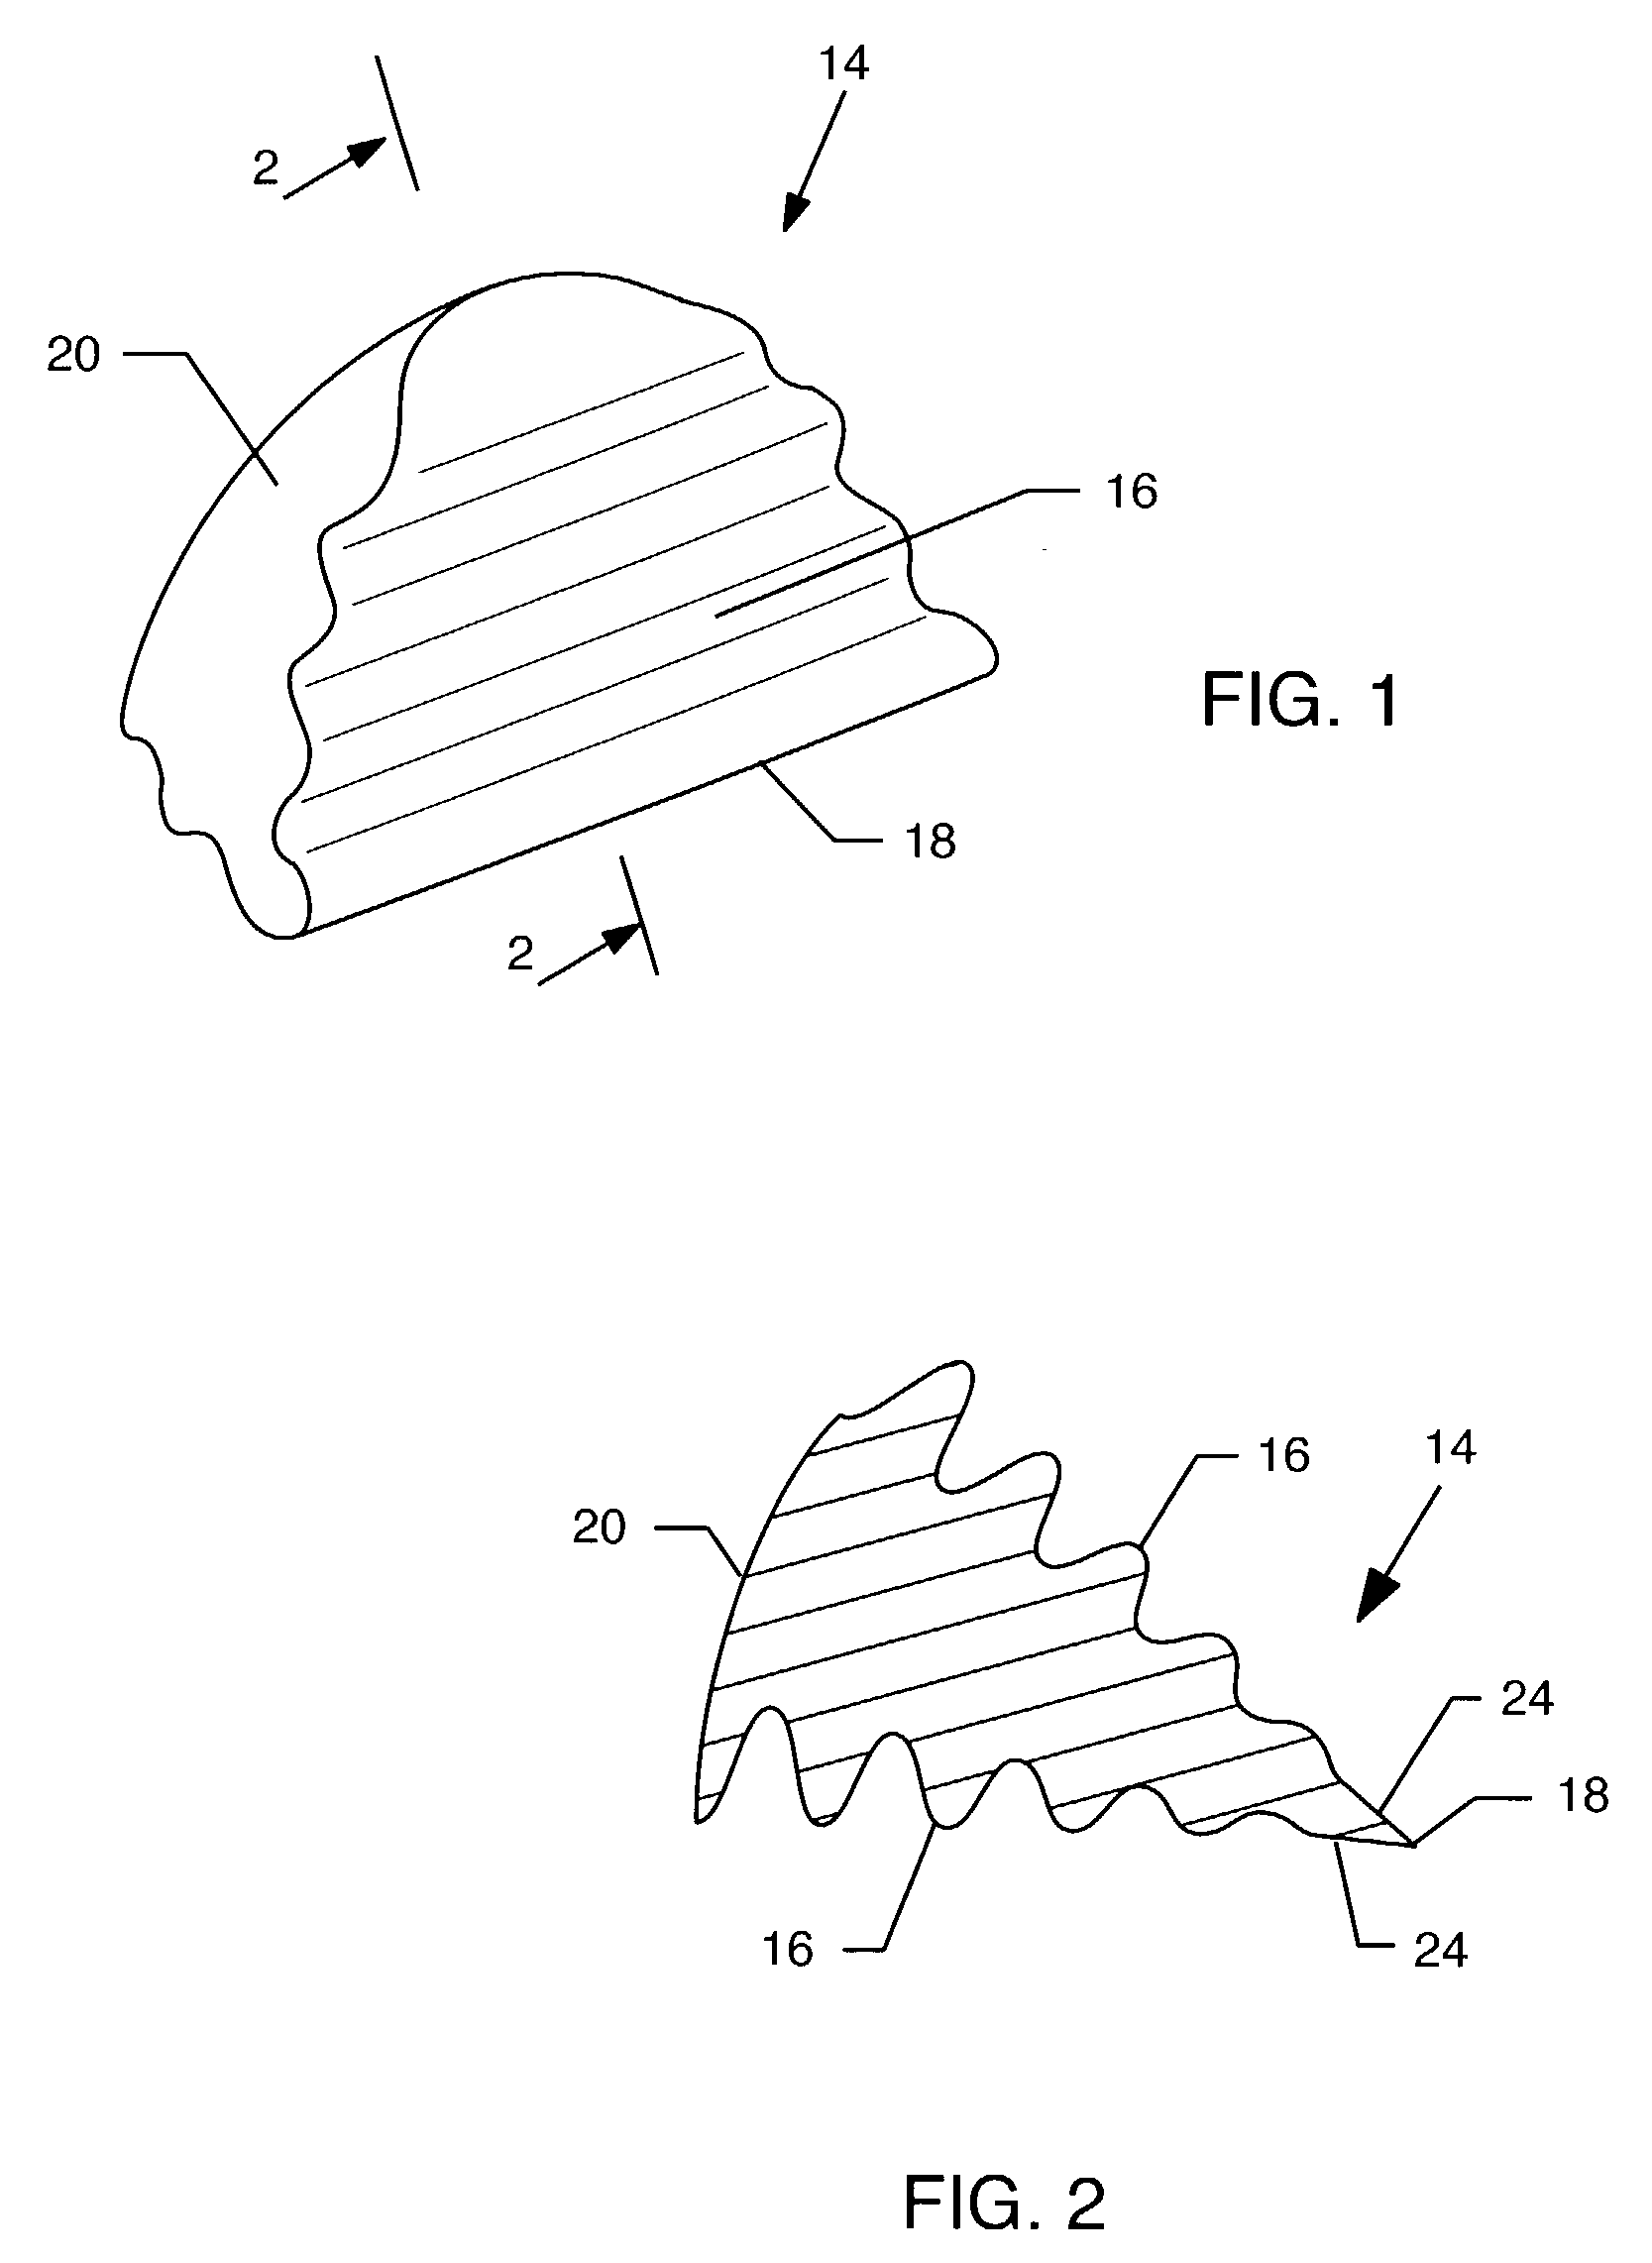 Corrugated knife fixture with variable pitch and amplitude